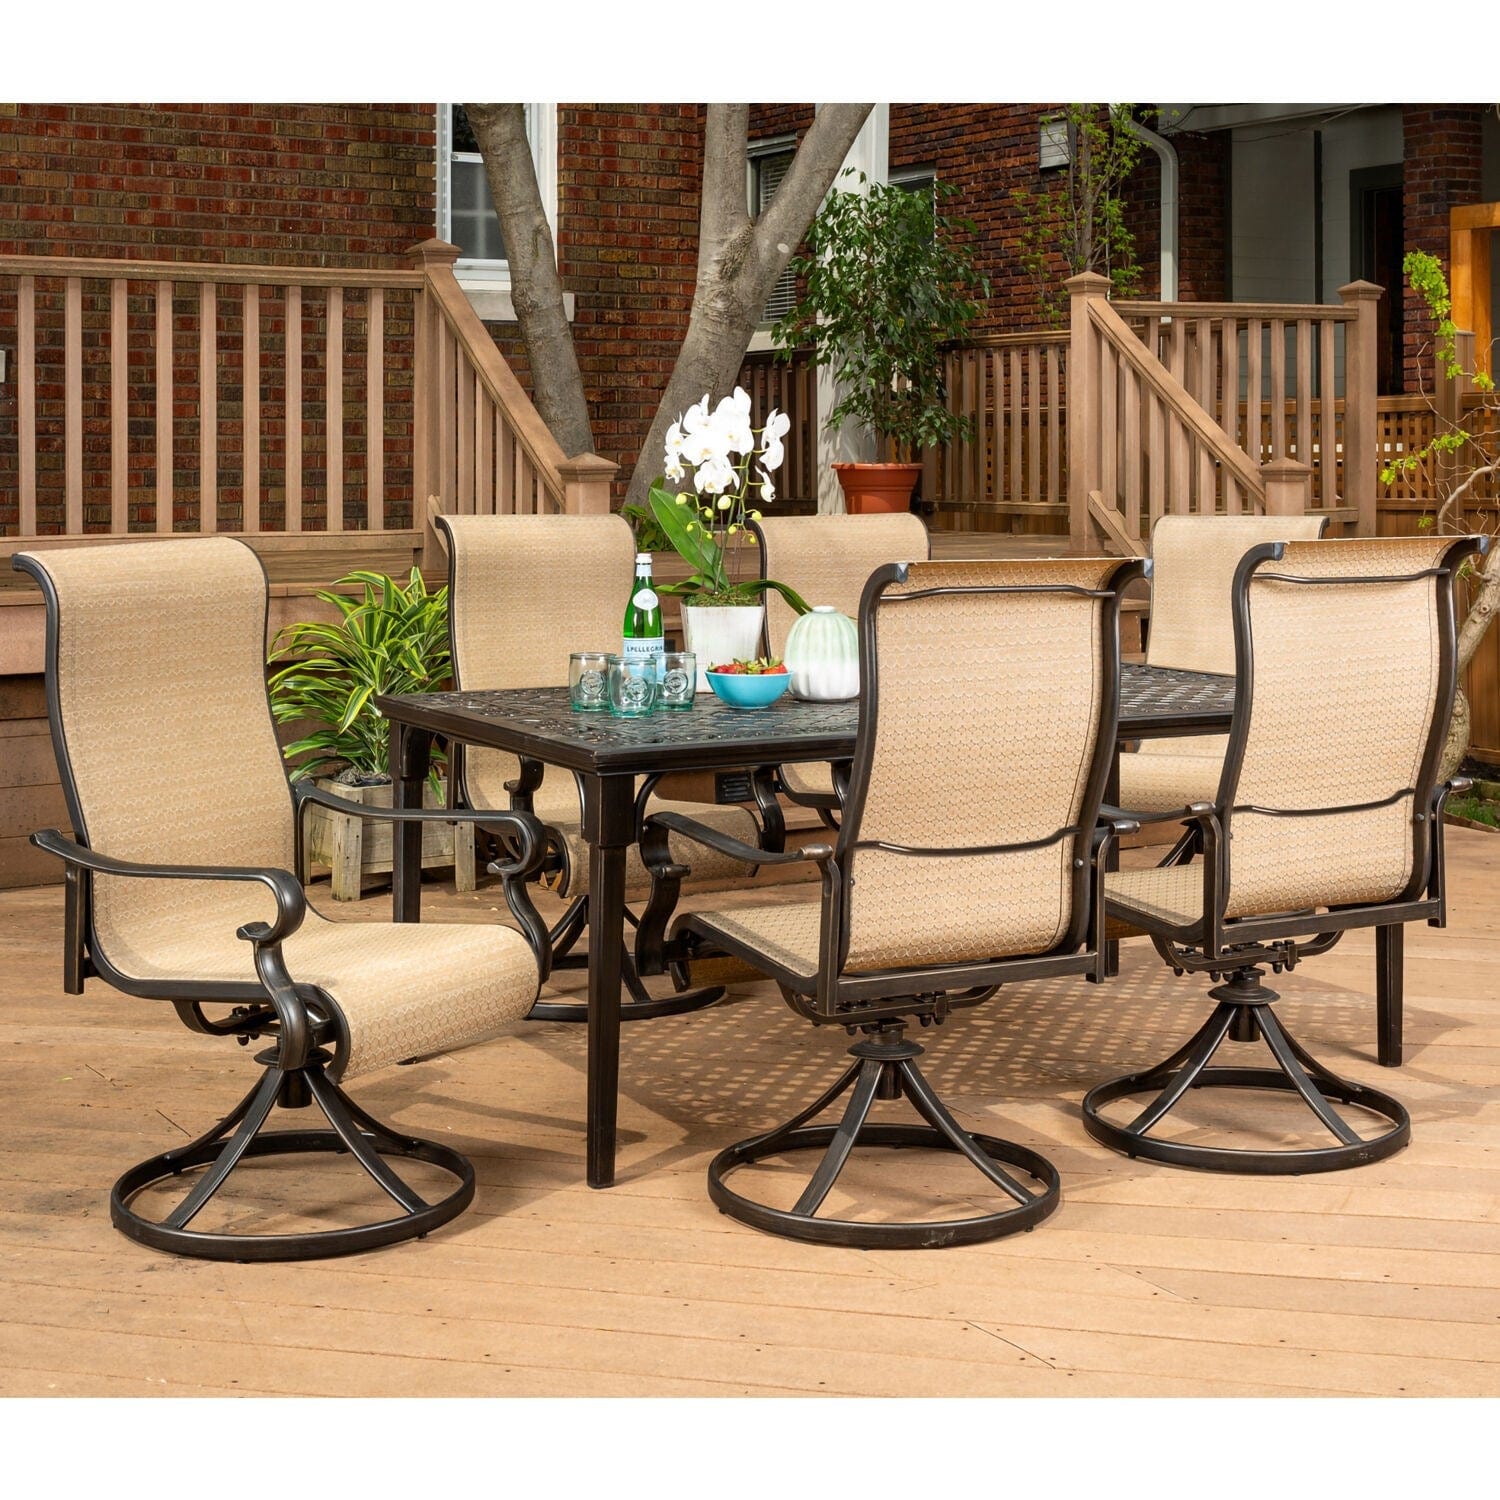 Hanover Outdoor Dining Set Hanover Brigantine 7-Piece Dining Set with a 40" x 70" Cast-Top Dining Table and 6 Sling Swivel Rockers - BRIGDN7PCSW-6